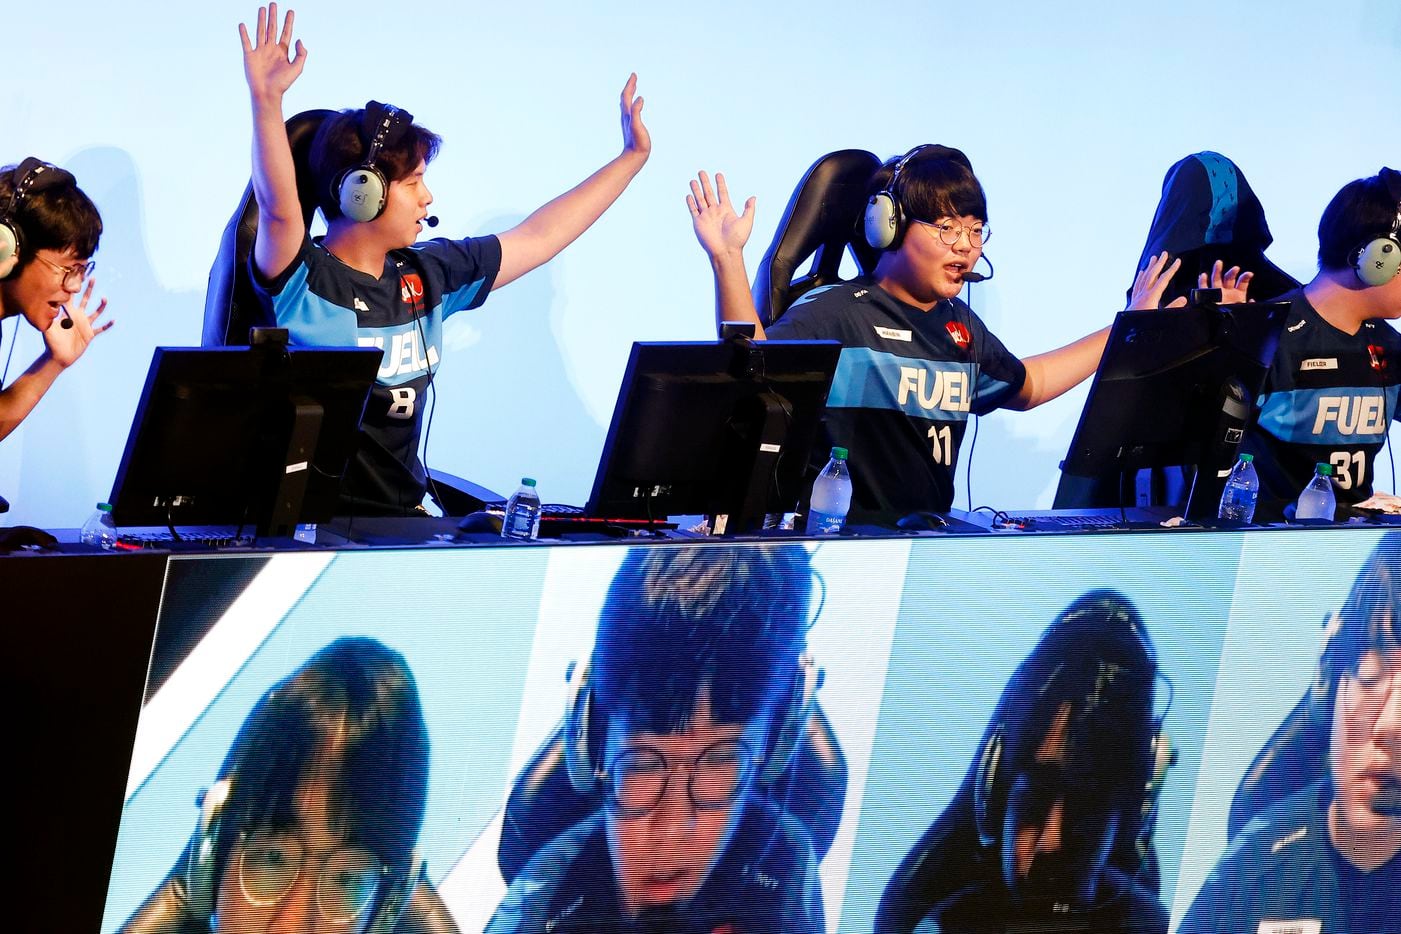 Dallas Fuel team members (from left) Kim 'Sp9rk1e' Yeonghan, Lee “Fearless” Eui-Seok, Choi ‘Hanbin’ Hanbeen and Kwon ‘Fielder’ Jun celebrate their Overwatch League win over the Houston Outlaws at Esports Stadium Arlington Friday, July 9, 2021. Dallas Fuel defeated Houston in The Battle for Texas, 3-0. It was the first in-person live competition for fans in over a year. Houston competed from their hometown. (Tom Fox/The Dallas Morning News)